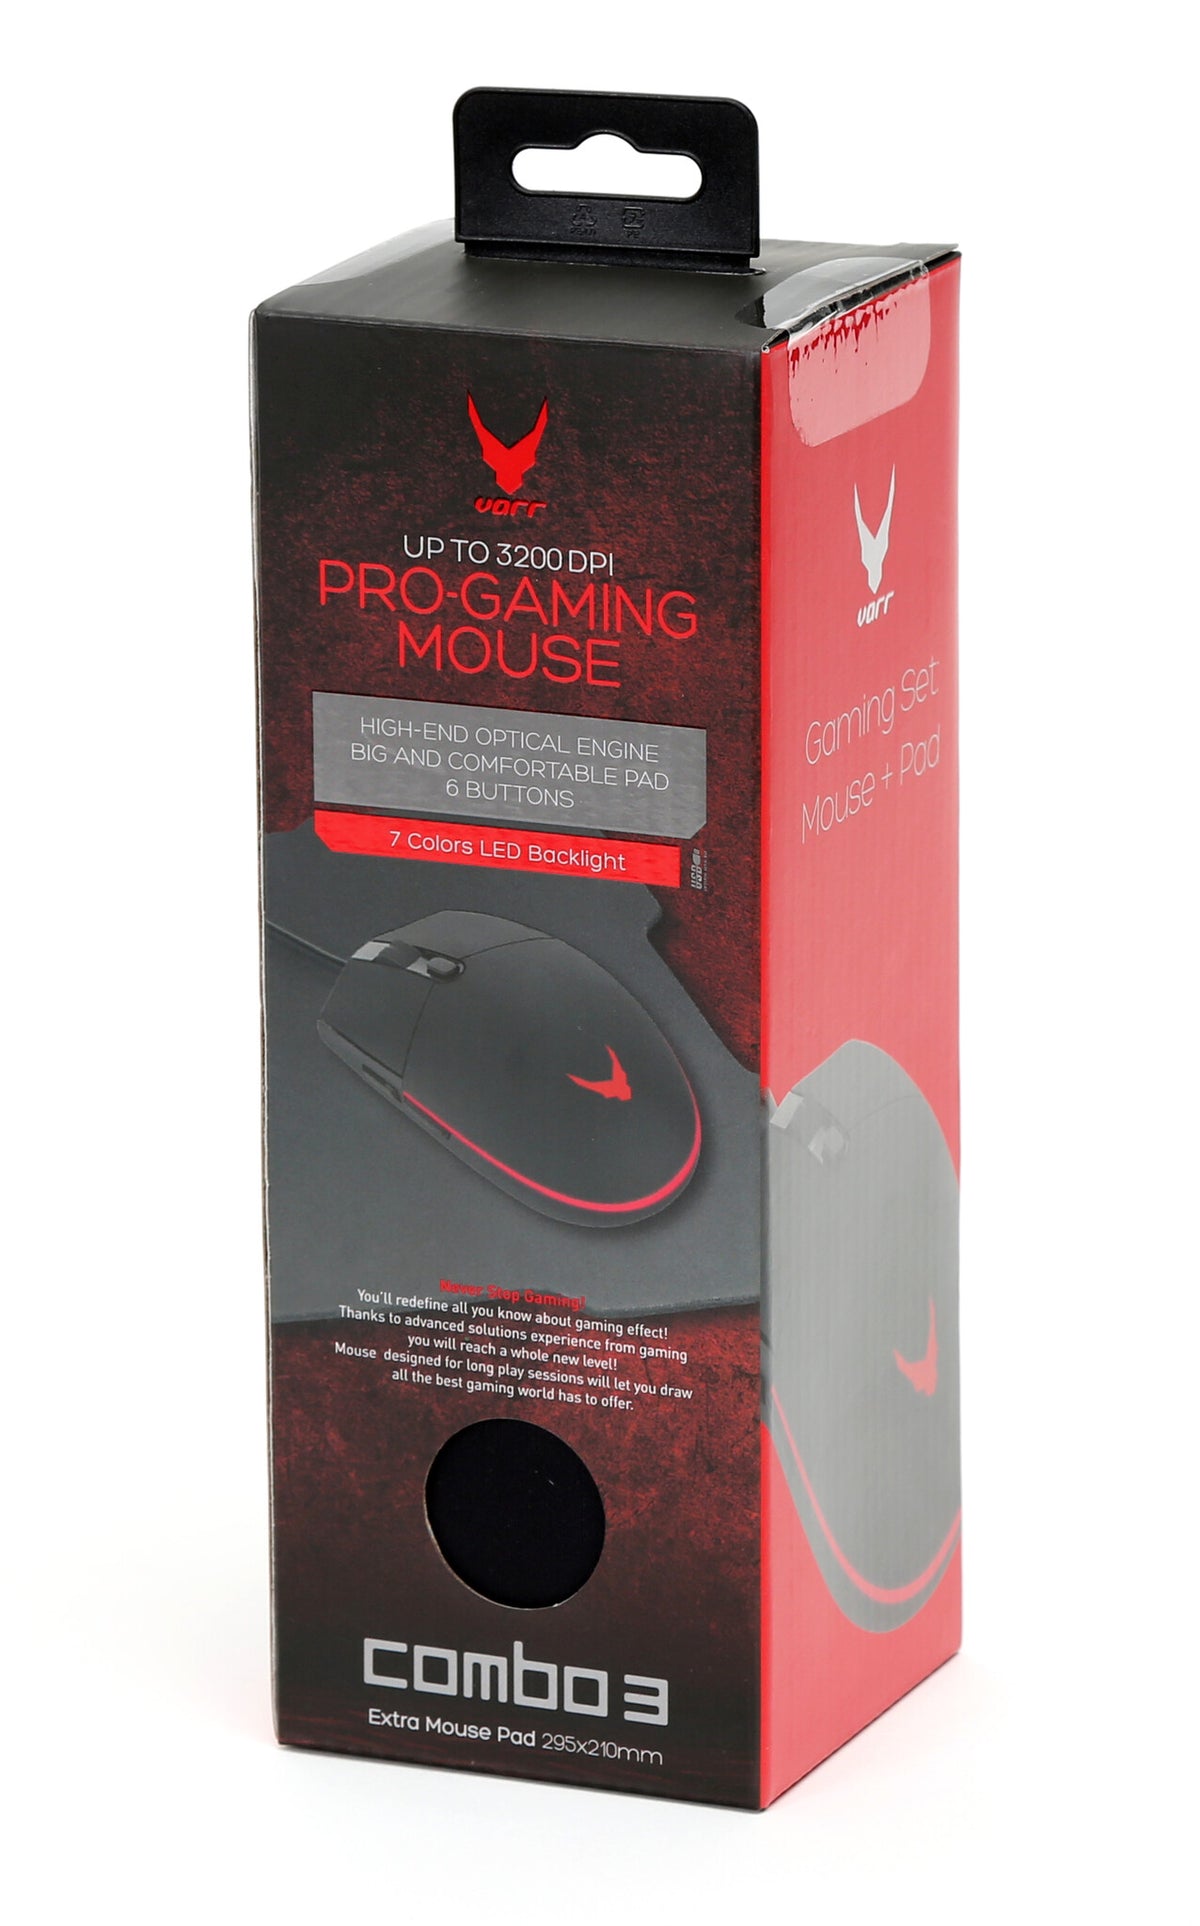 Varr VSETMPX5 Gaming Mouse and Mousepad Set - Wired USB-A Optical LED backlit Mouse in Black/Red - 3,200 DPI